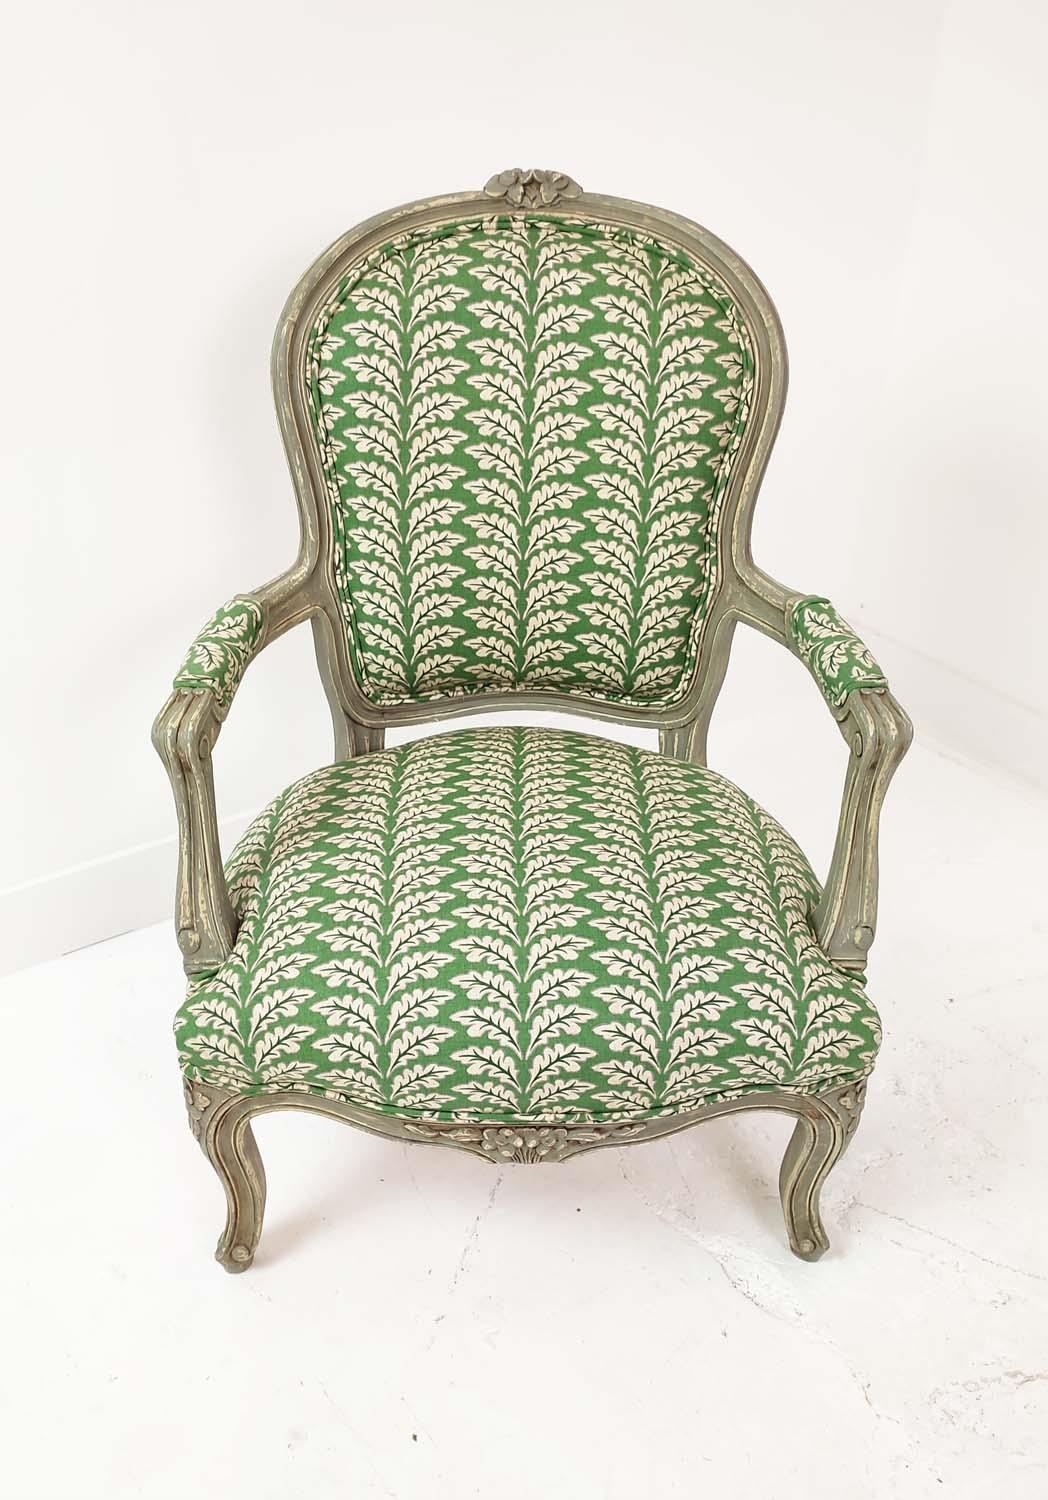 FAUTEUILS, a pair, Louis XV style, grey painted with green leaf patterned upholstery, 92cm H x - Image 3 of 8